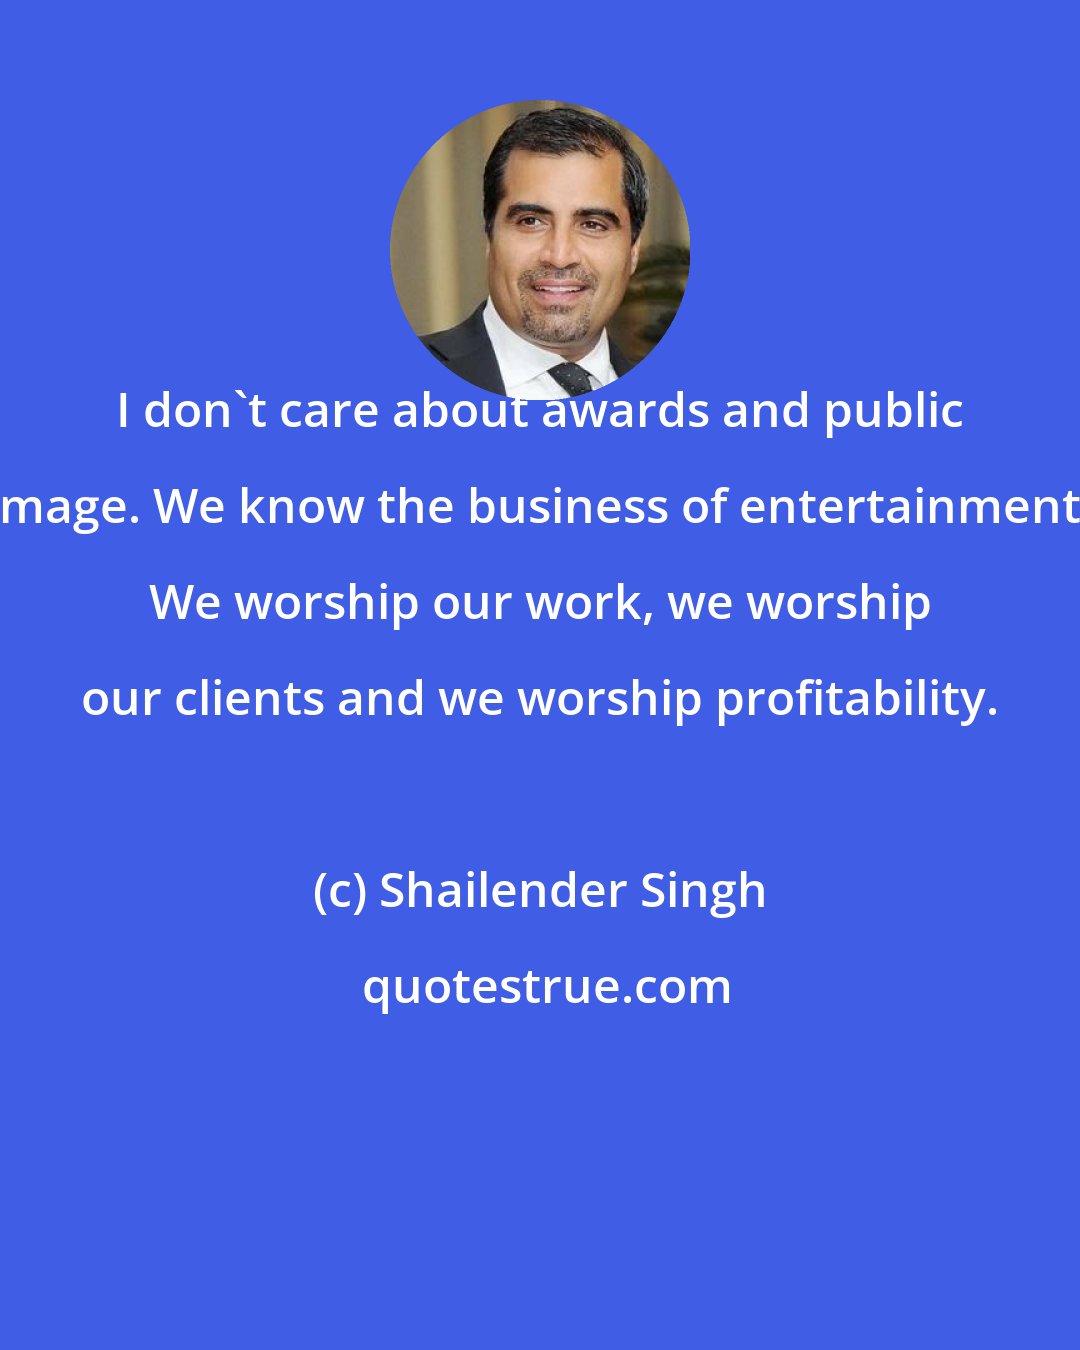 Shailender Singh: I don't care about awards and public image. We know the business of entertainment. We worship our work, we worship our clients and we worship profitability.